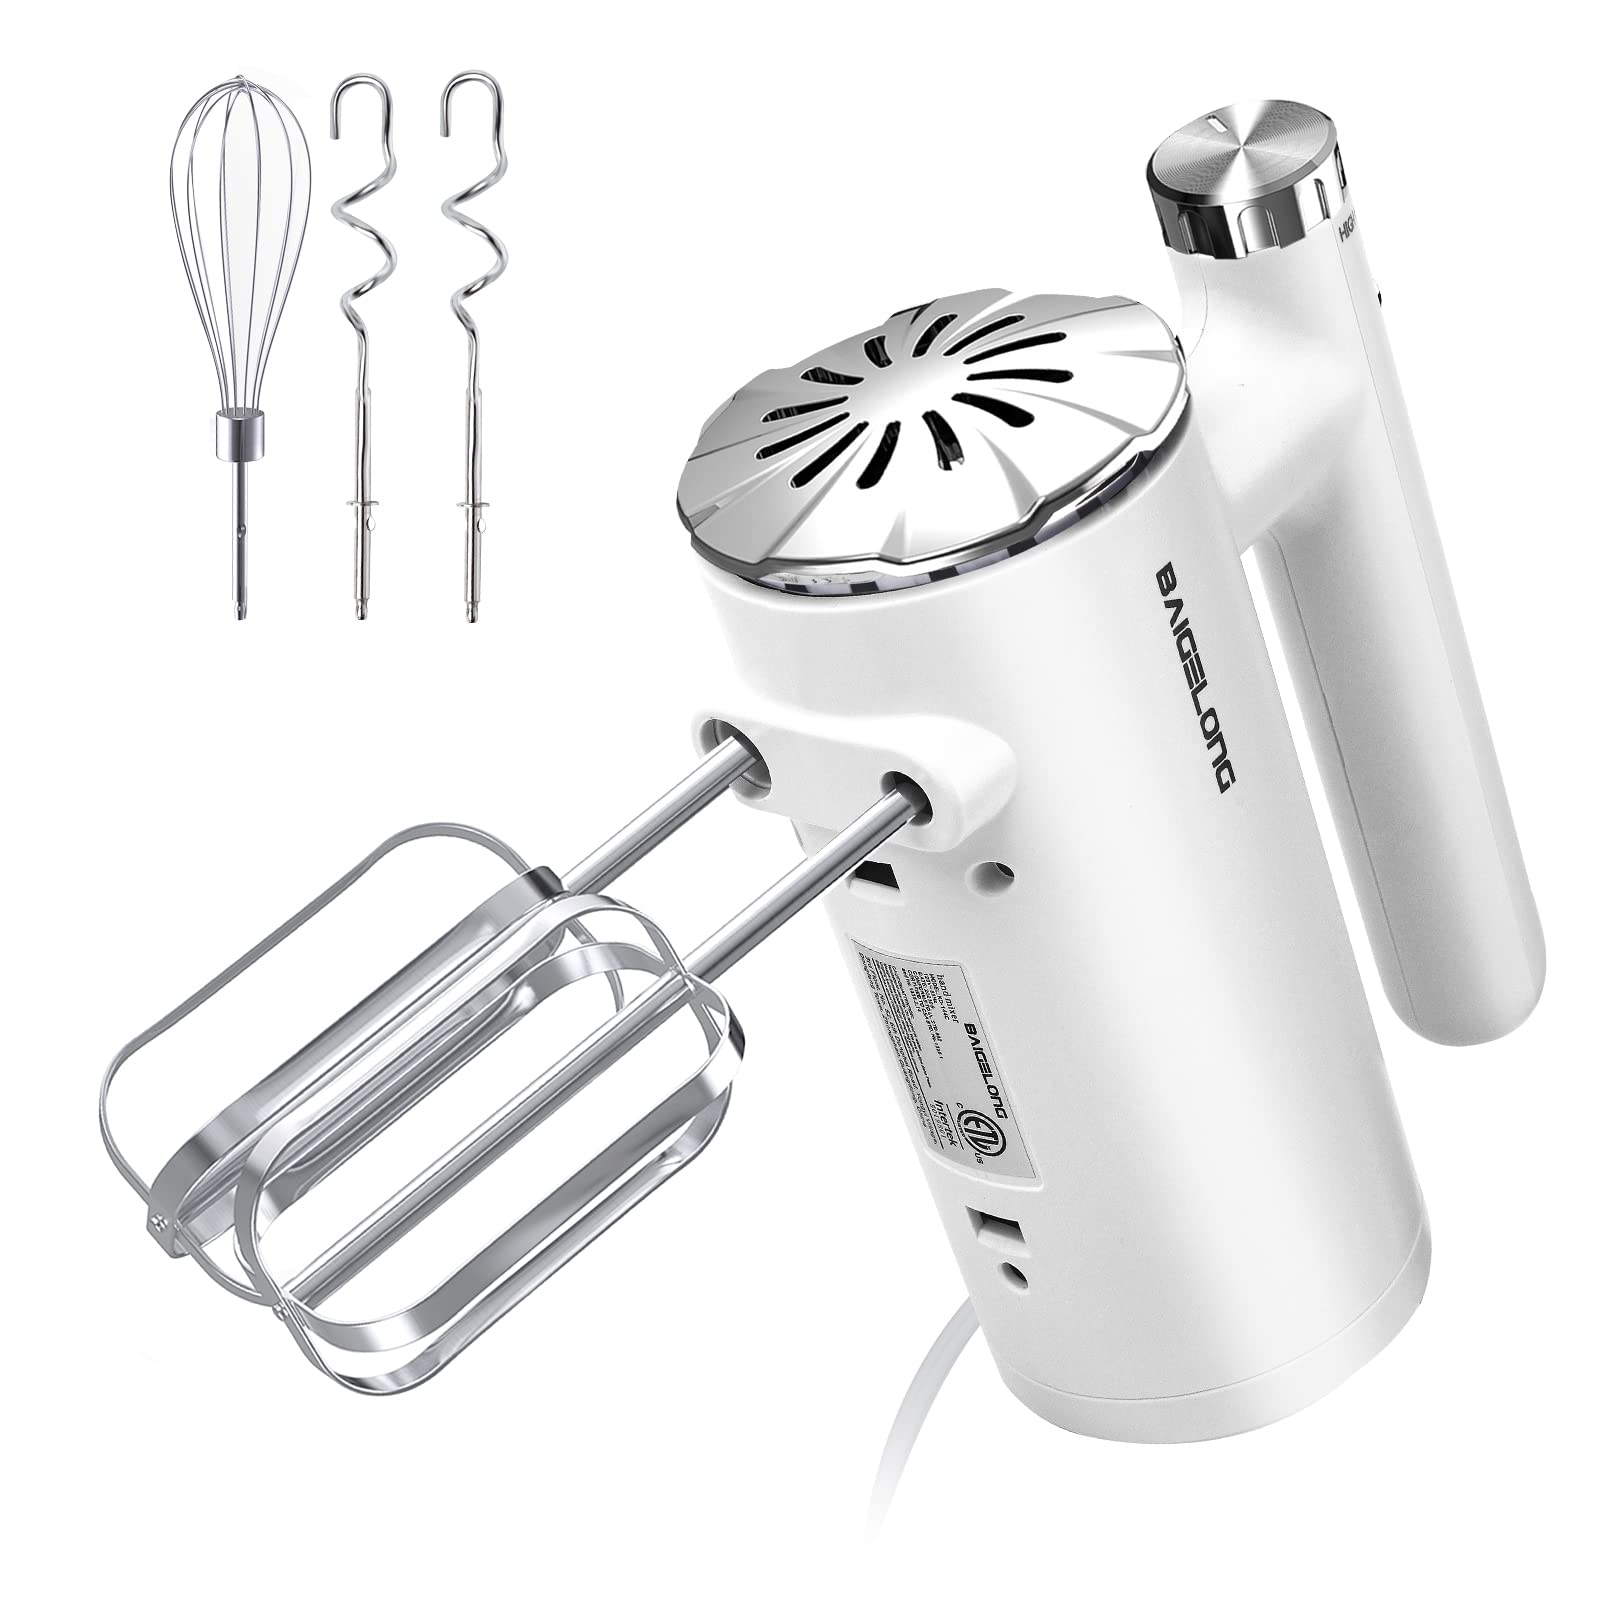 BAIgELONg Hand Mixer Electric 500W Ultra Power Handheld Mixer with continuously Variable Speed control 5 Stainless Steel Accesso